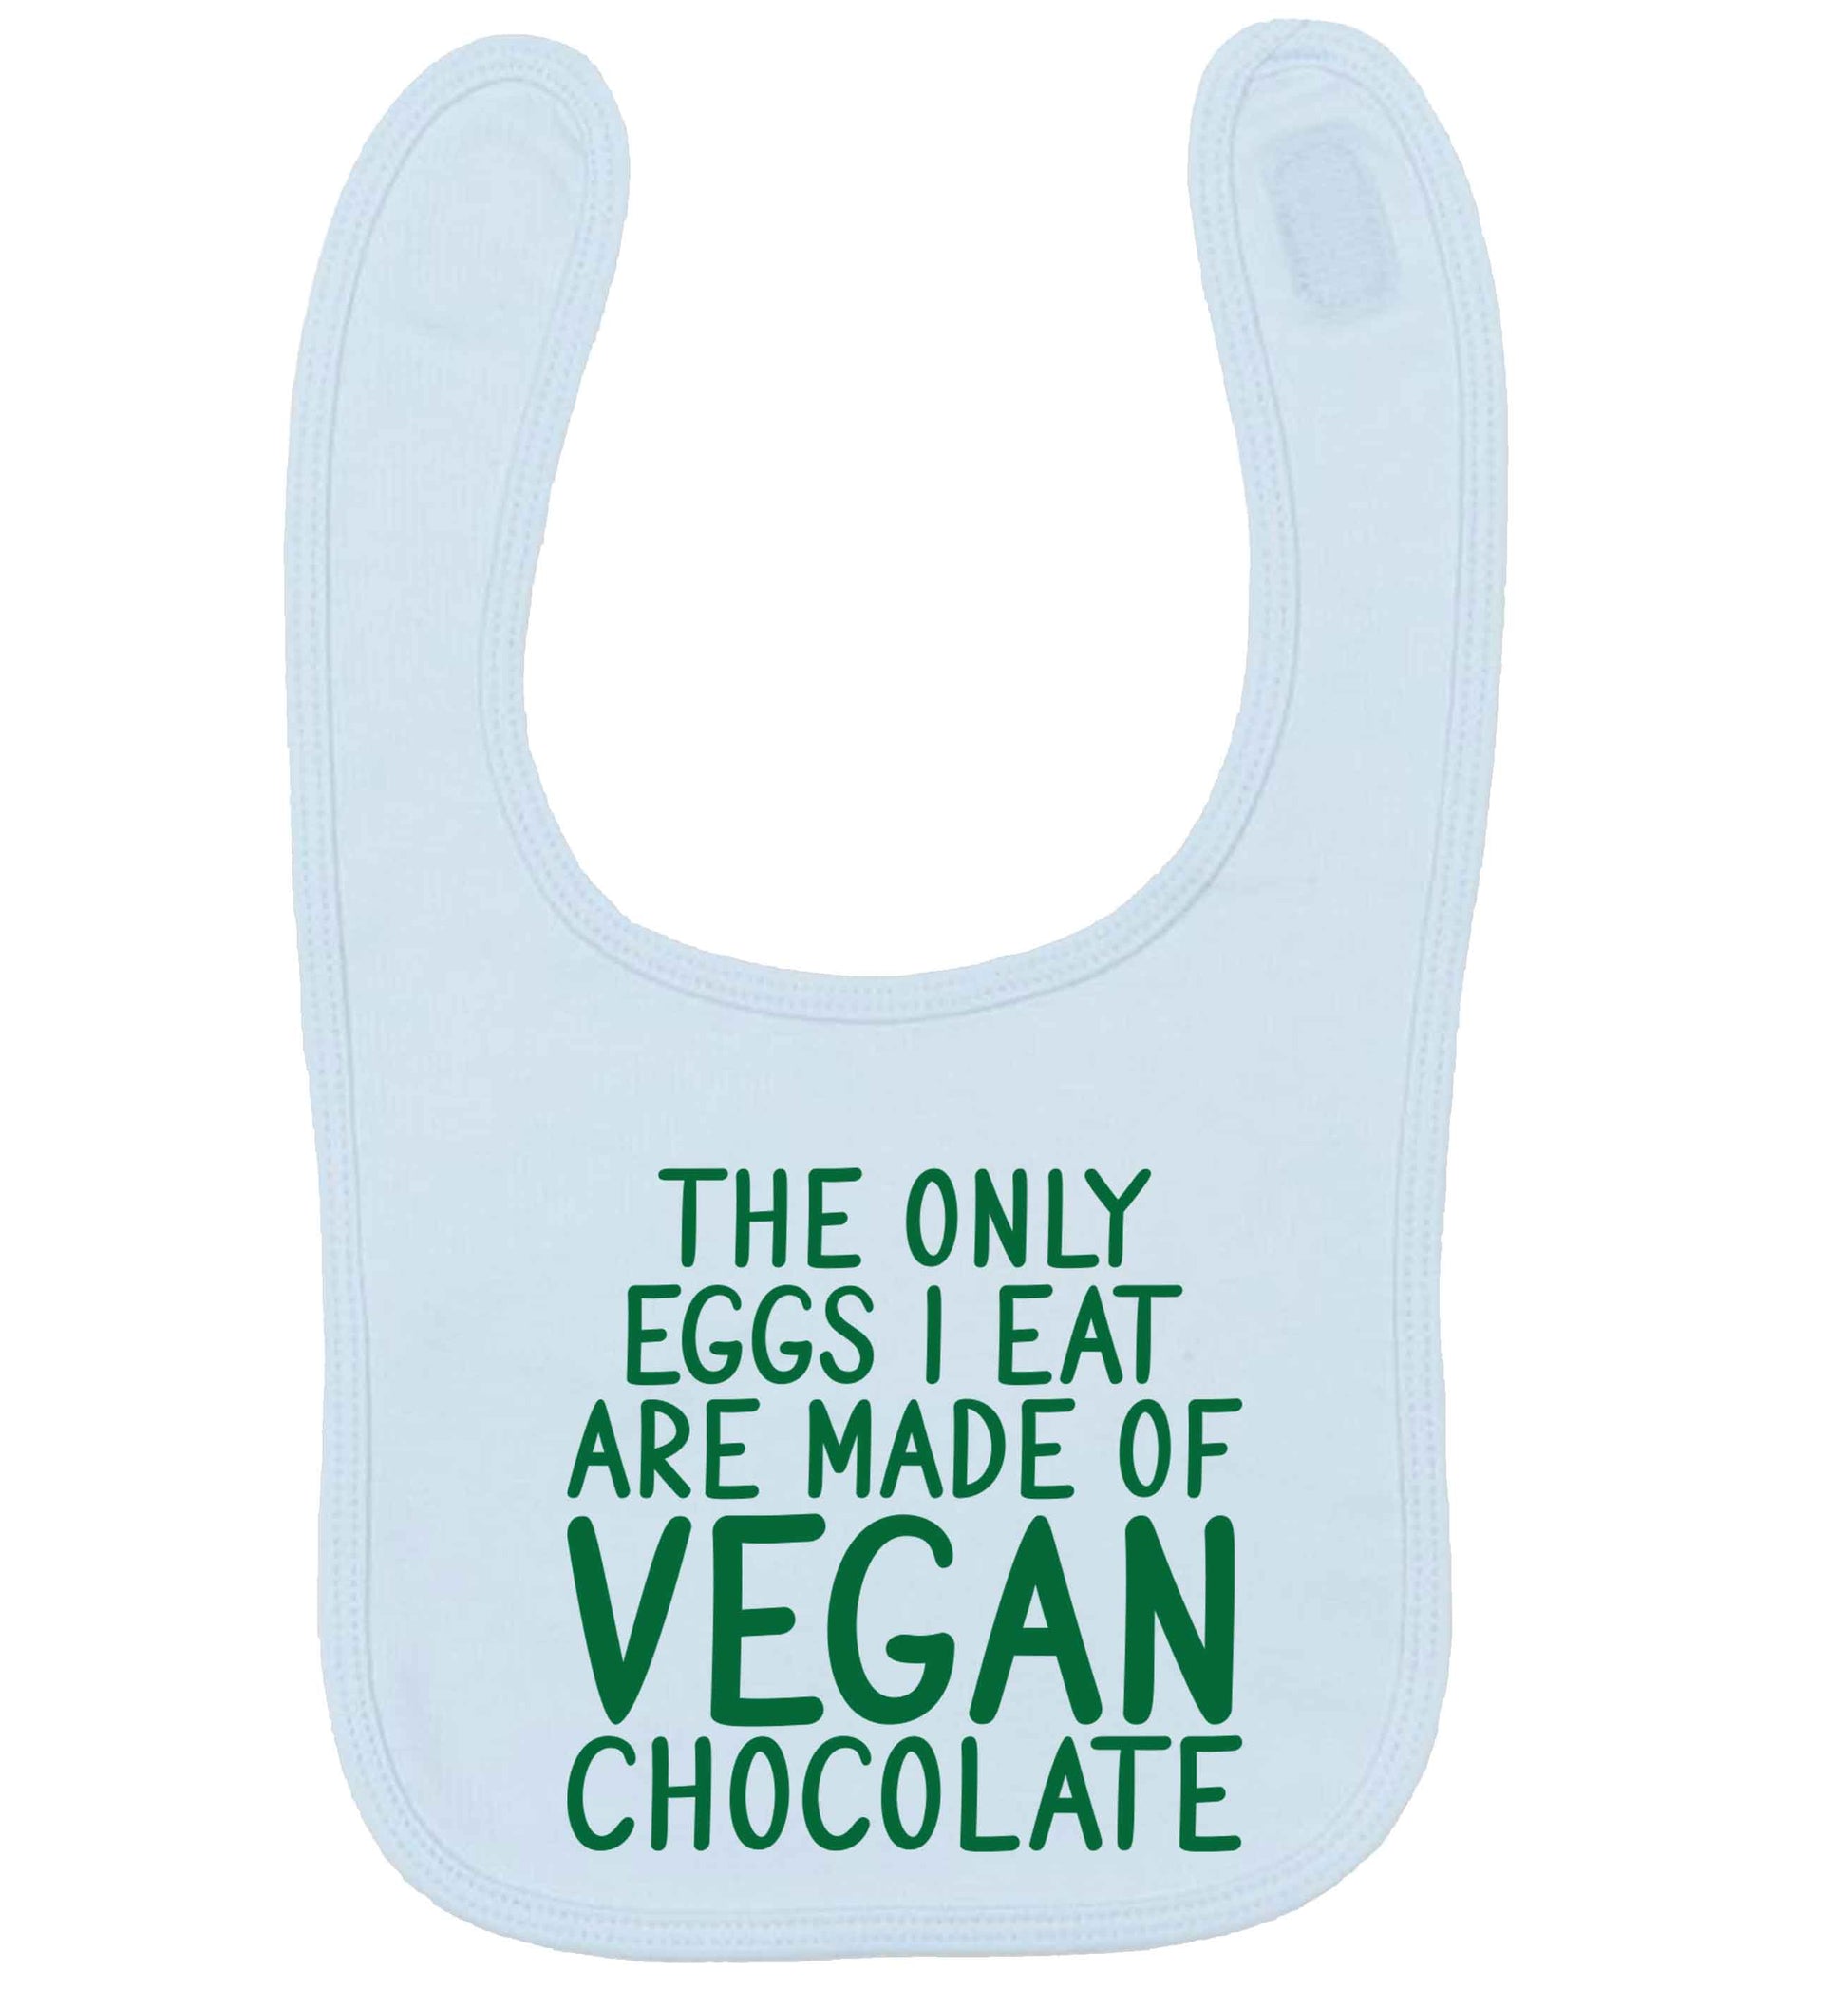 The only eggs I eat are made of vegan chocolate pale blue baby bib